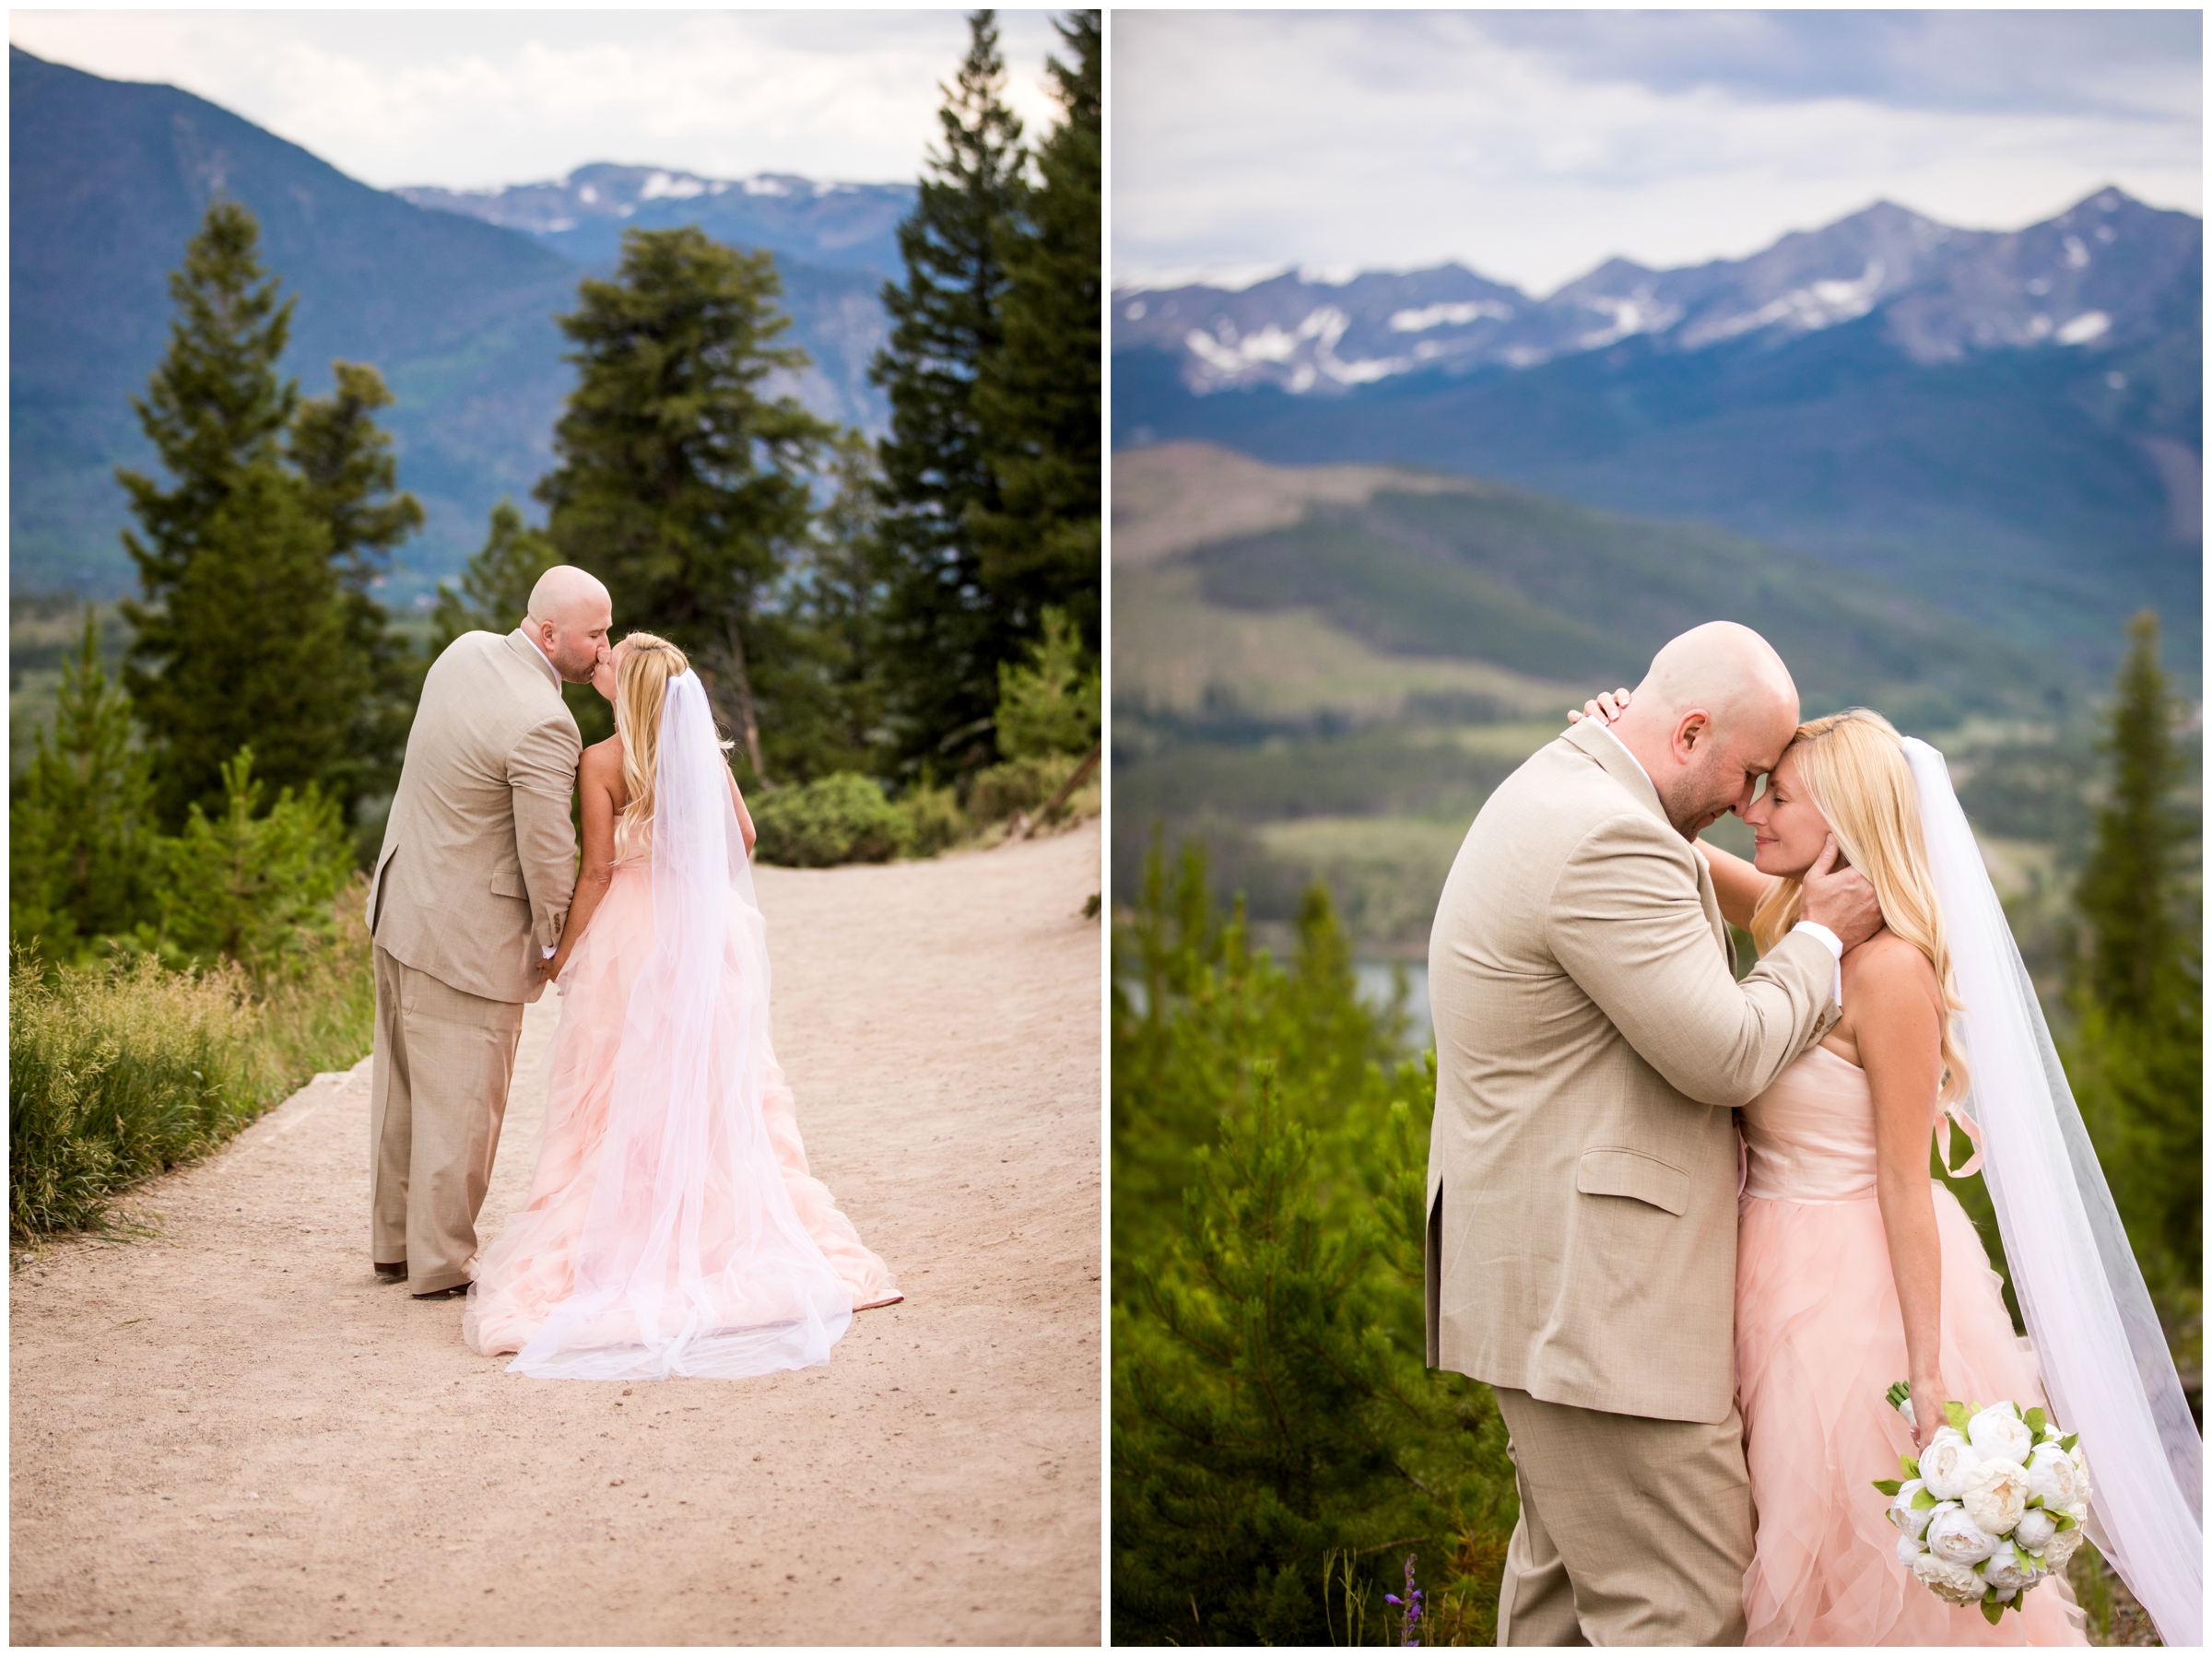 Couple walking down the road during Breckenridge wedding photos at Sapphire point overlook